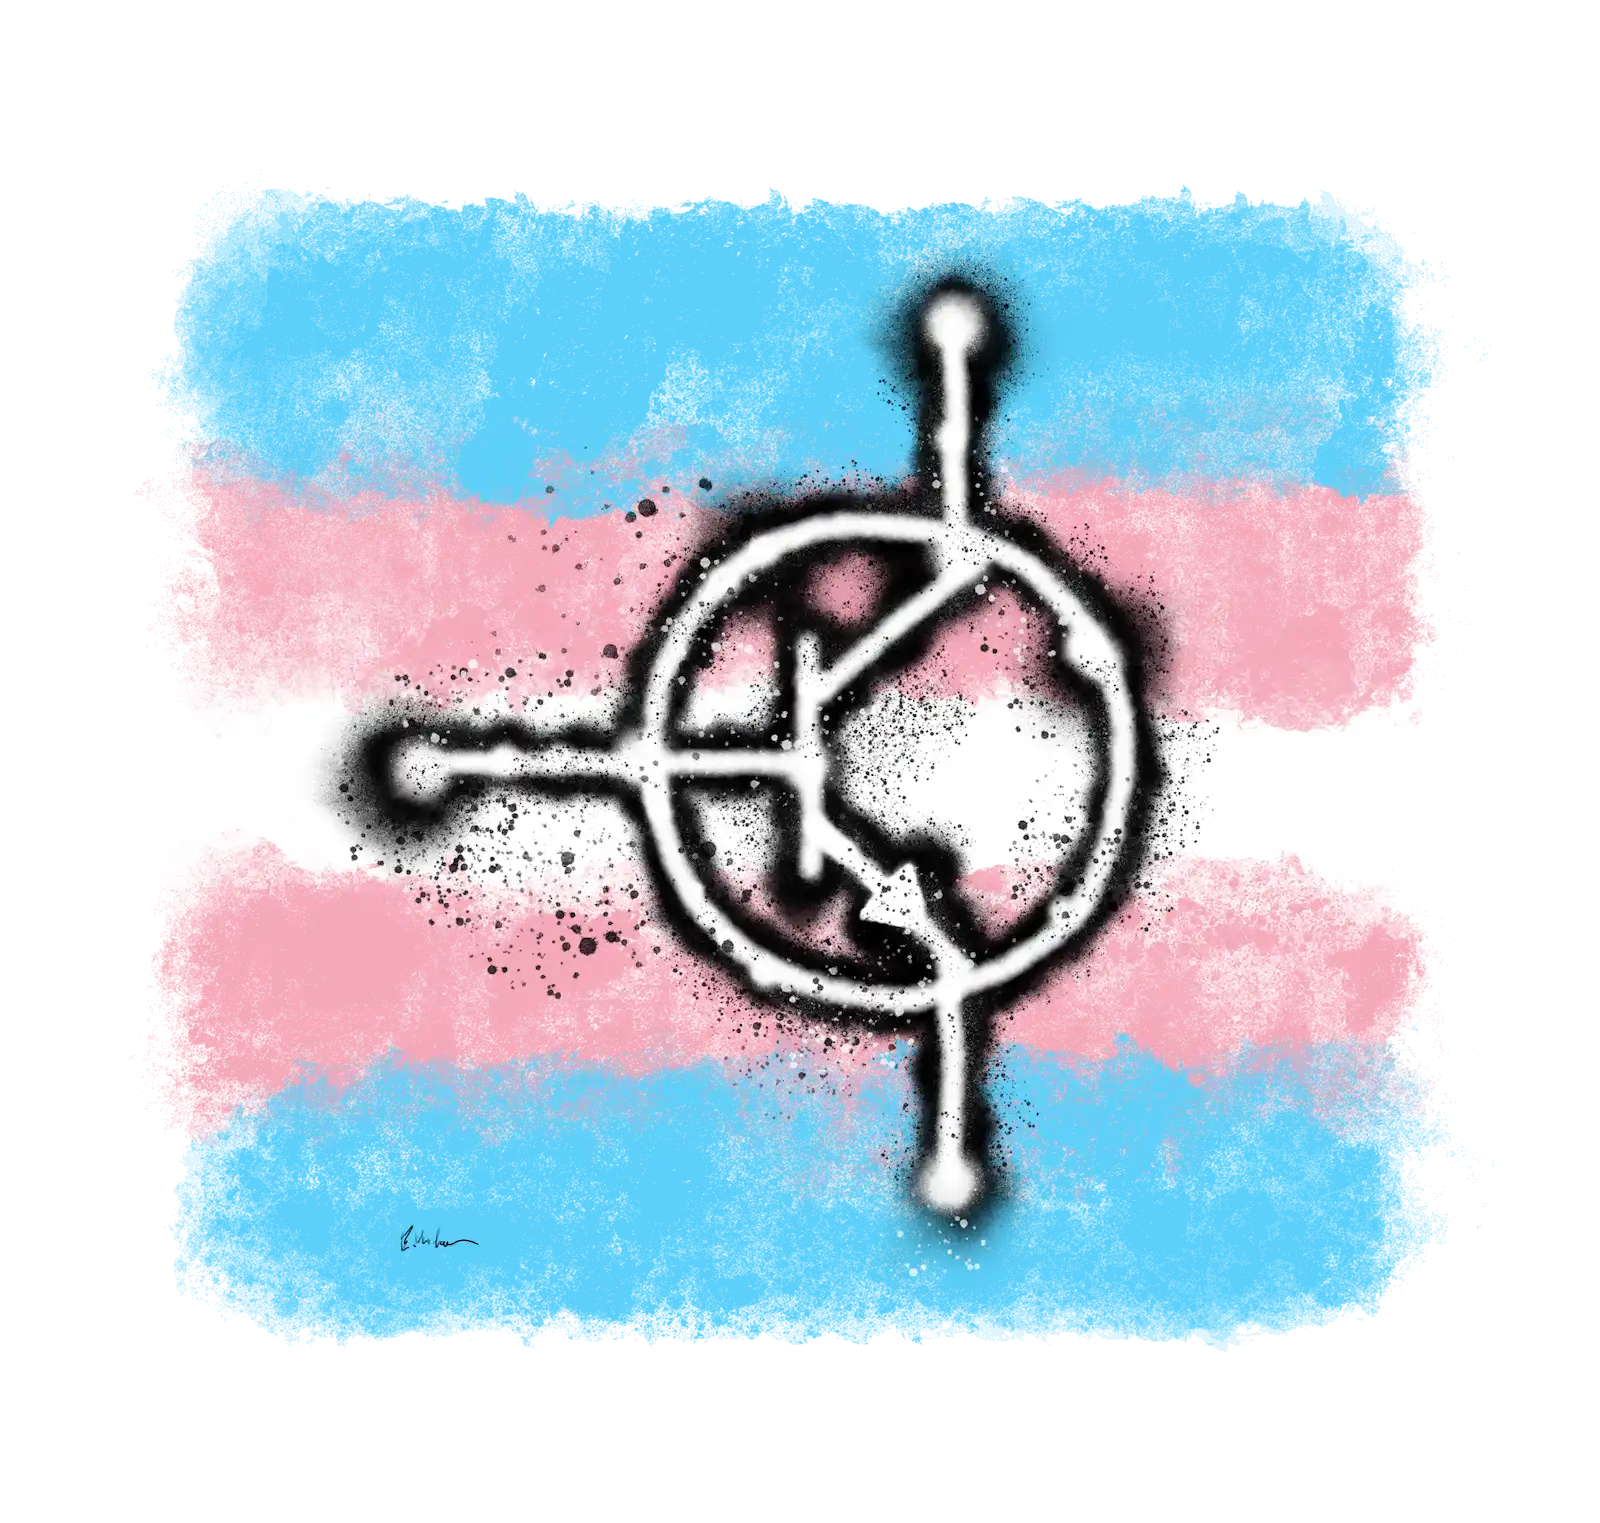 Circuit diagram symbol of an NPN transistor sprayed on a background of trans pride colors